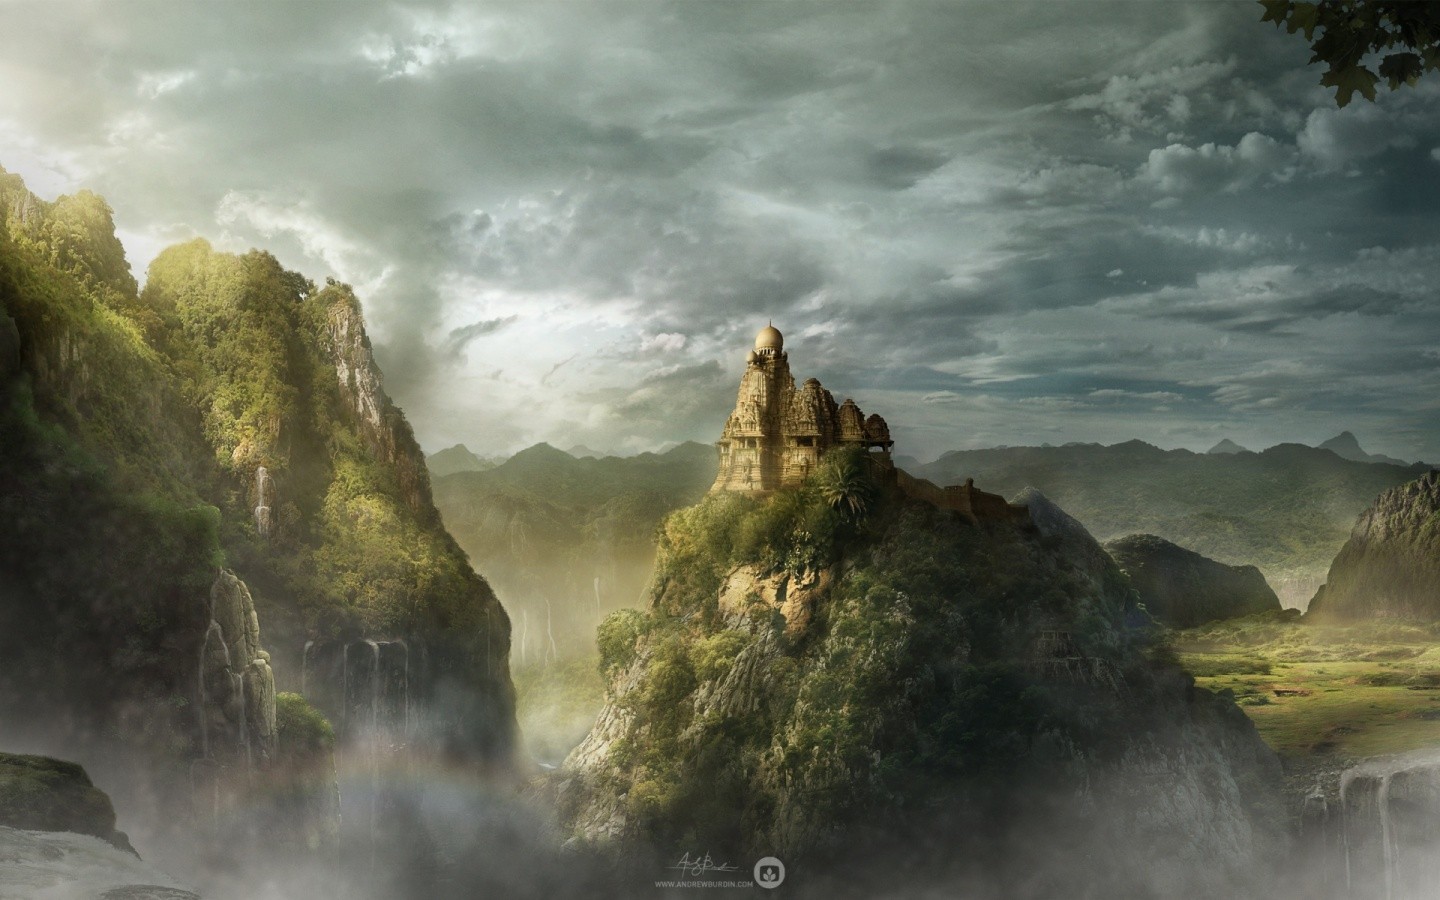 Mountains City Clouds Photography Temple Fall Digital Art Edited Landscape 1440x900